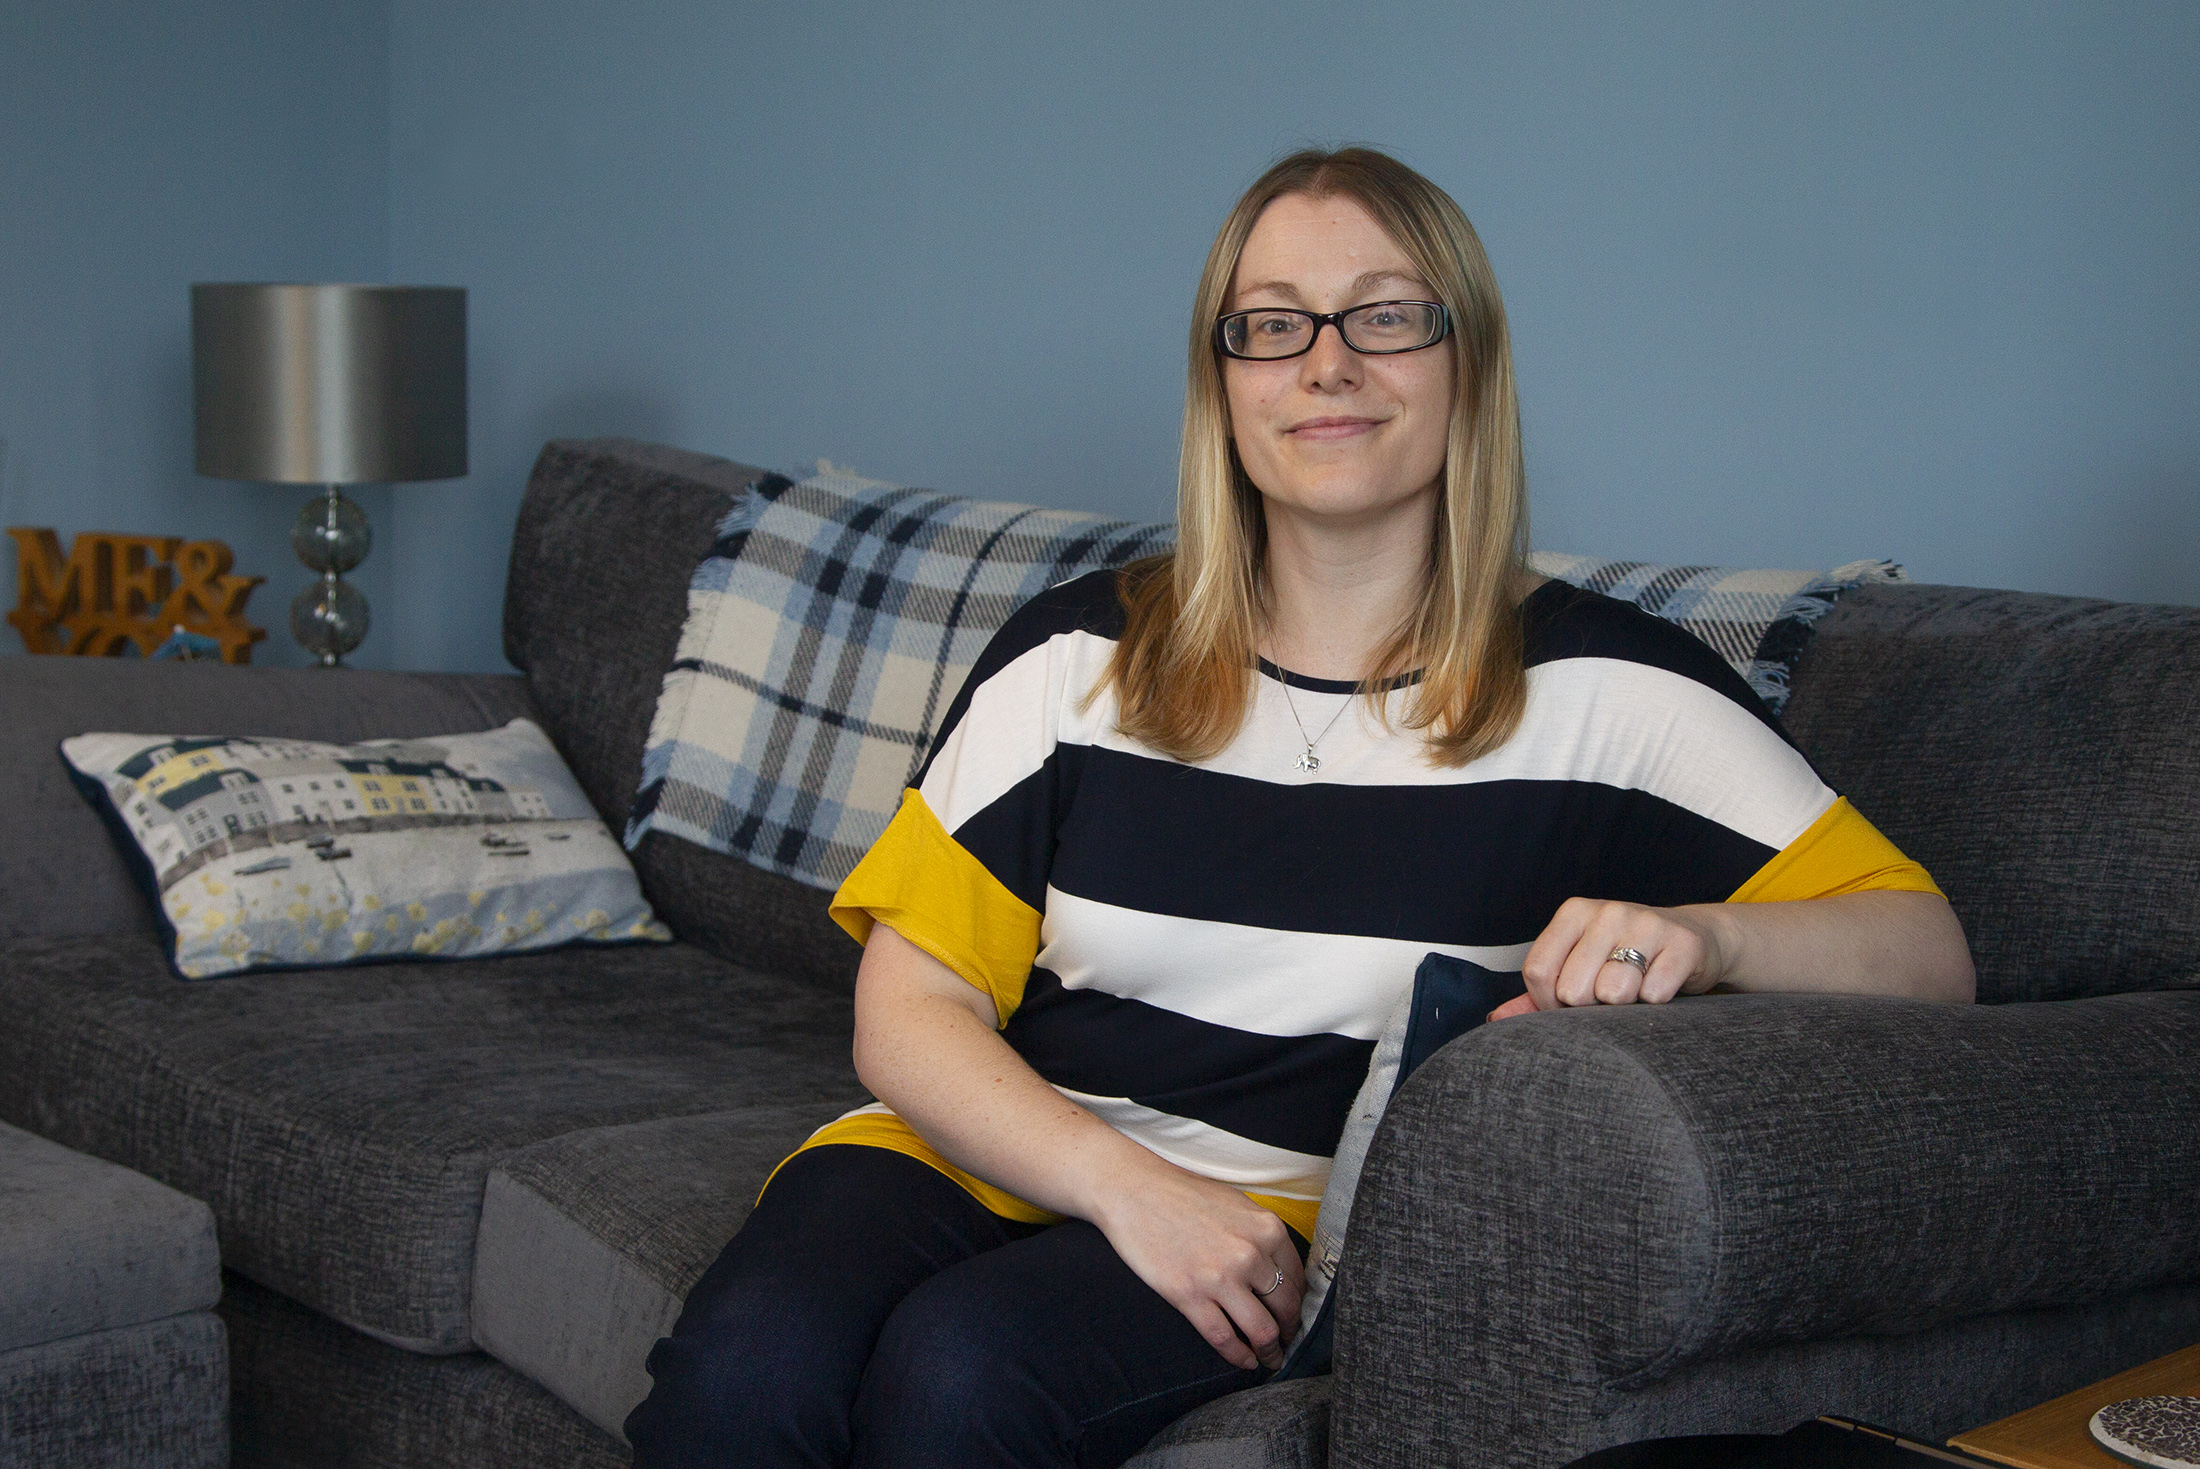 Vicky Chapman runs a support group for endometriosis sufferers.